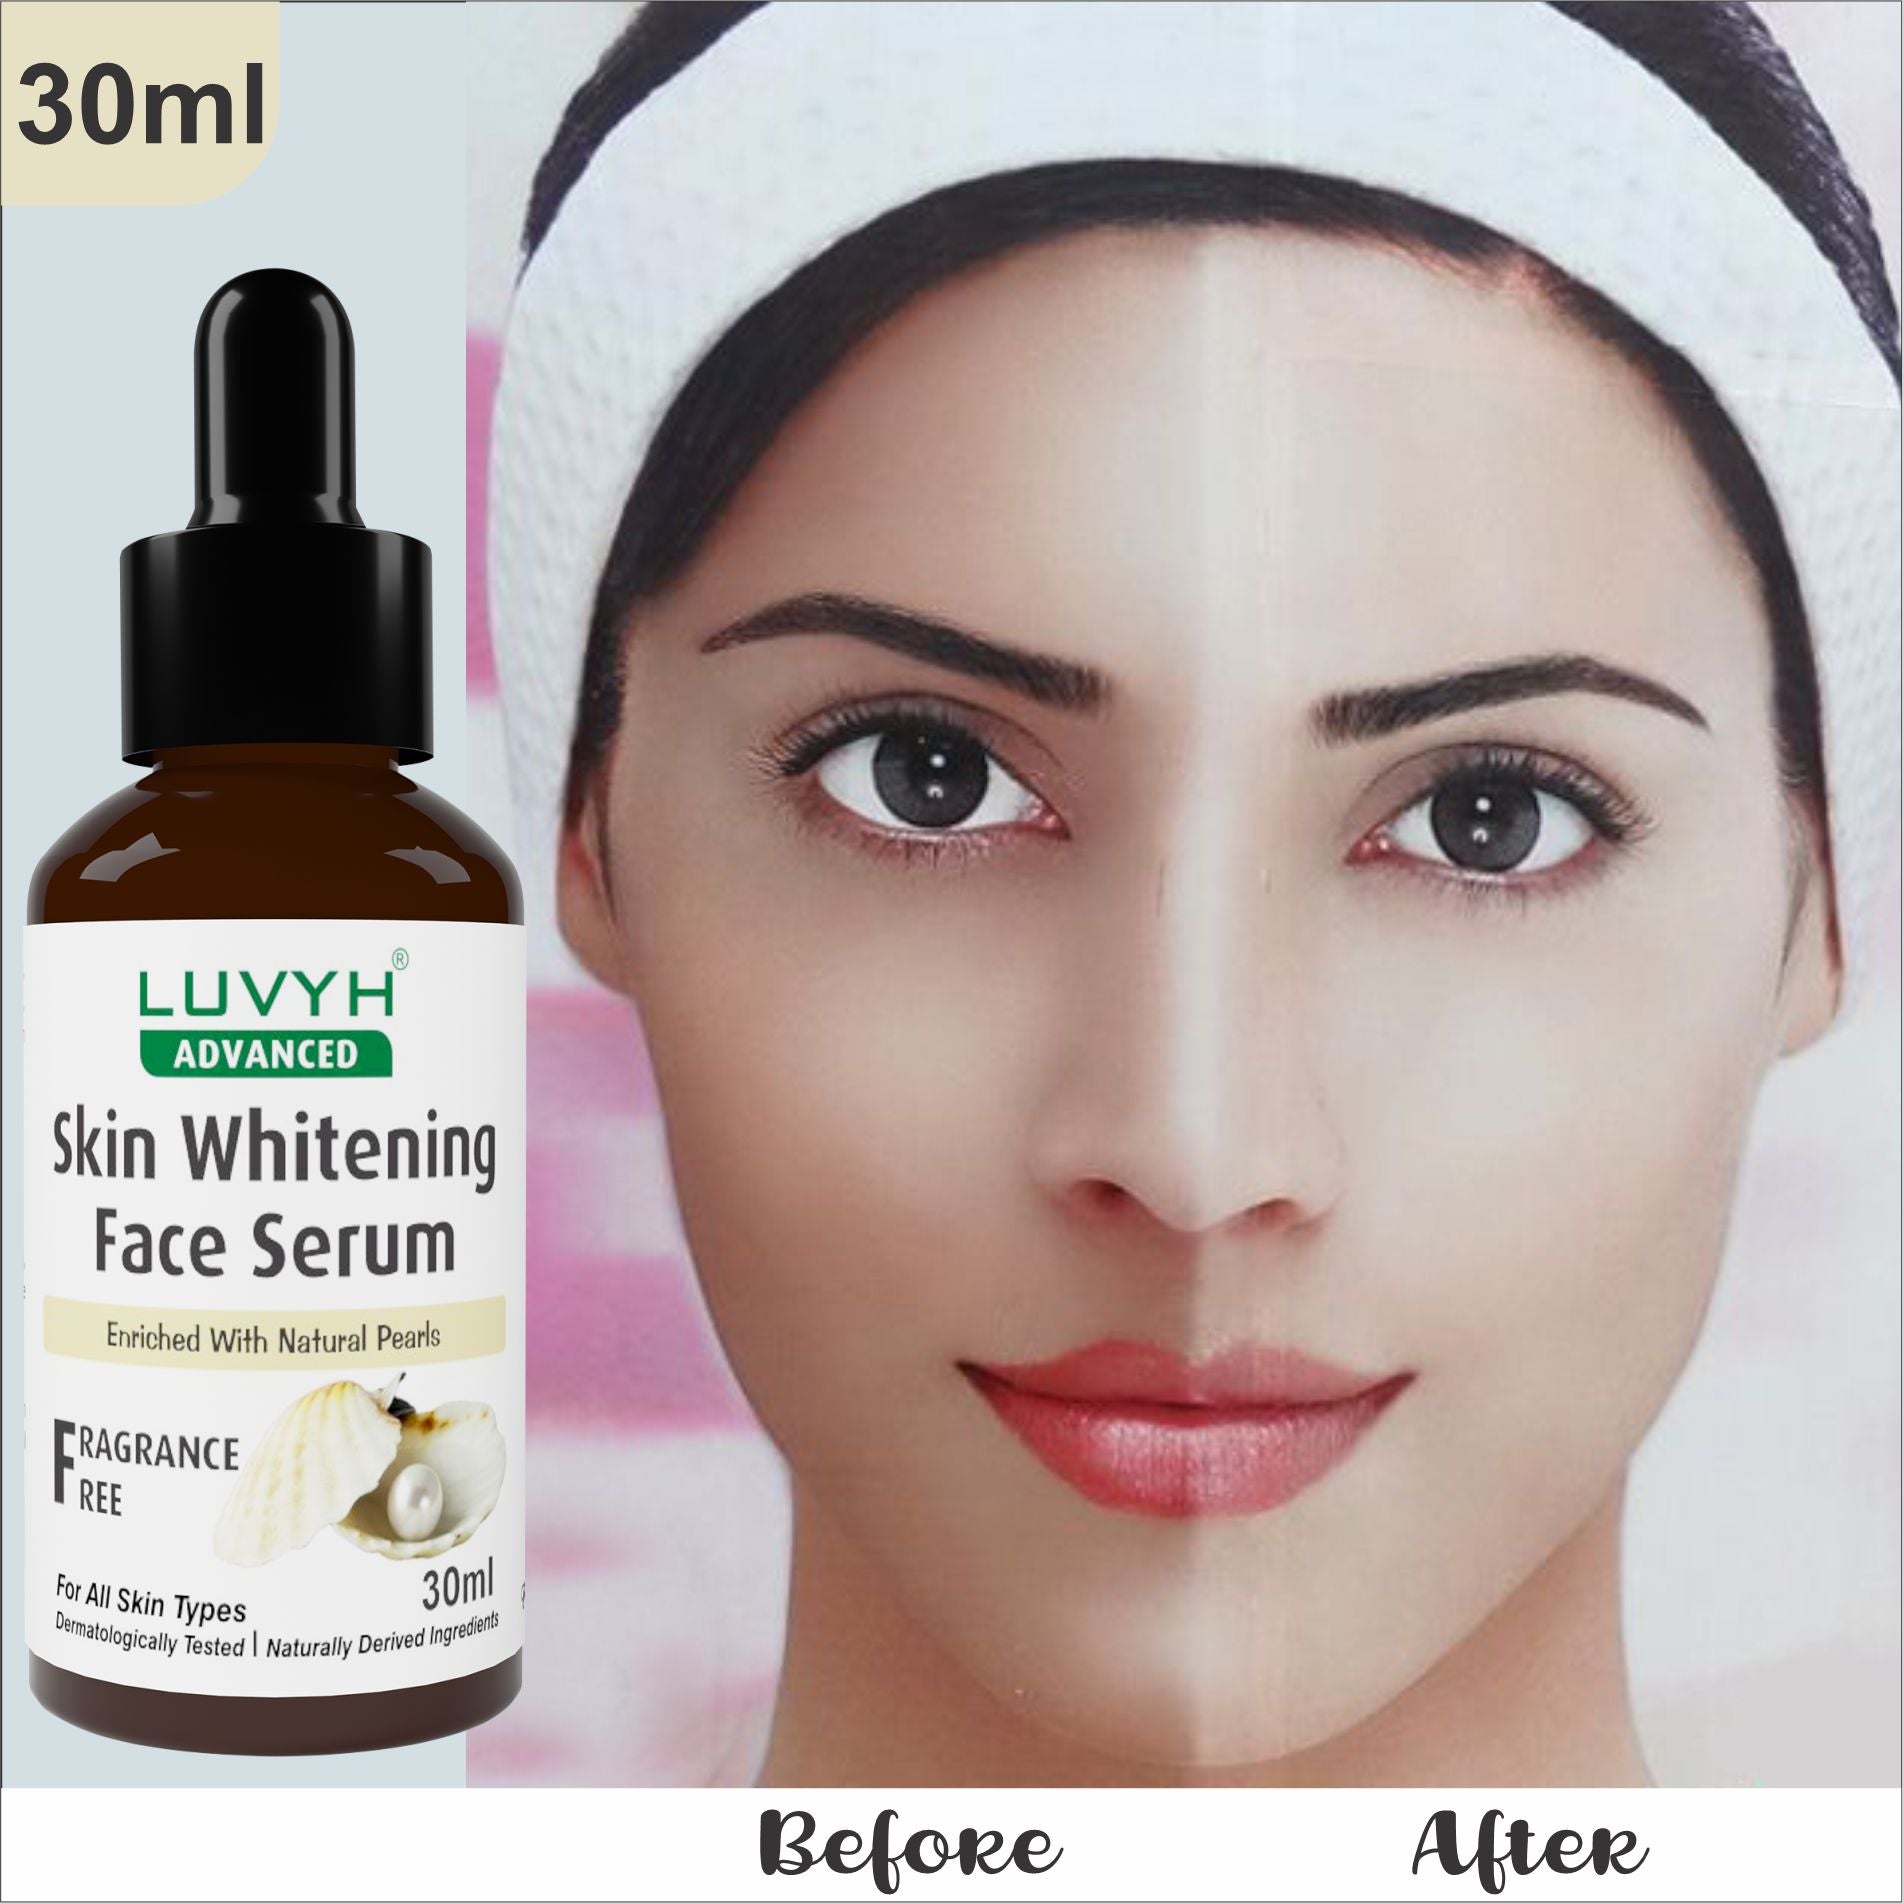 Before and After Results  - Skin Whitening Face Serum enriched with Natural Pearls 